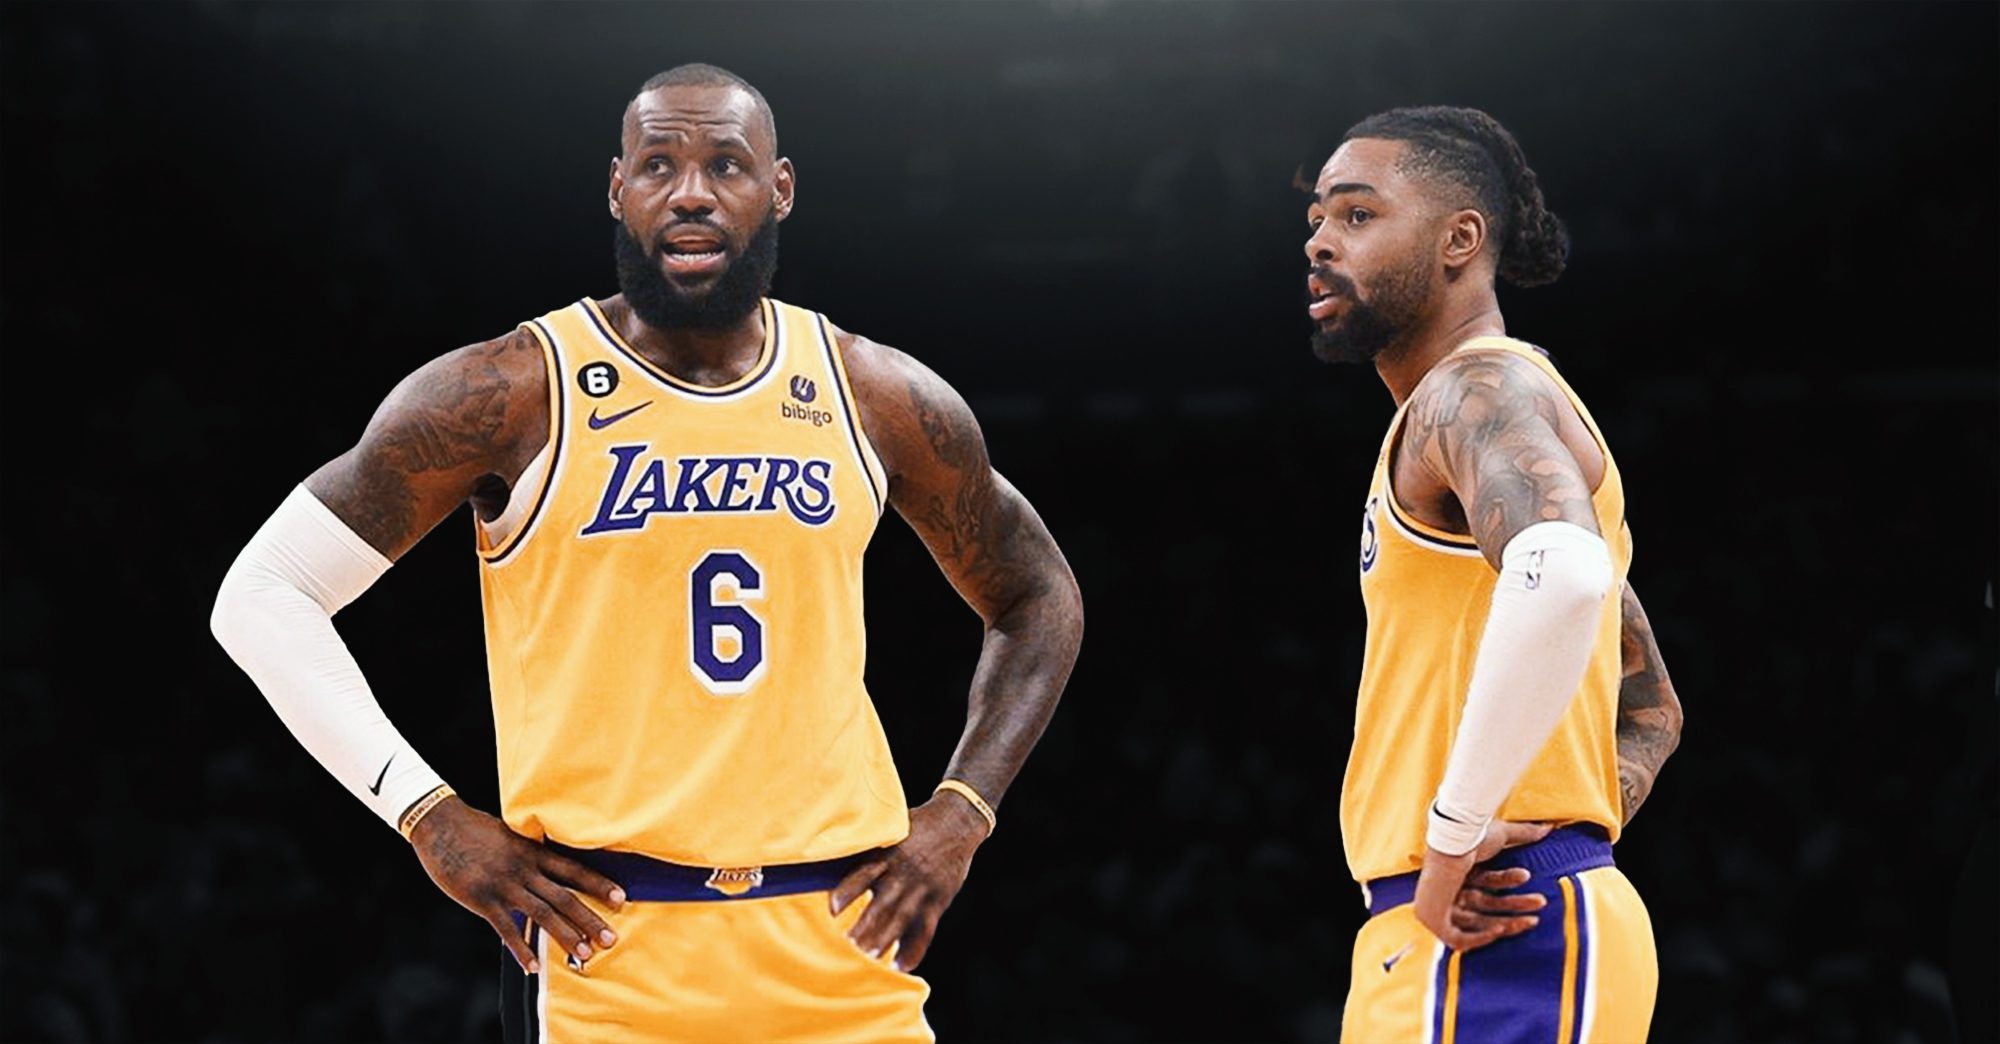 LeBron James and D’Angelo Russell Speak Out on Frustrating Loss